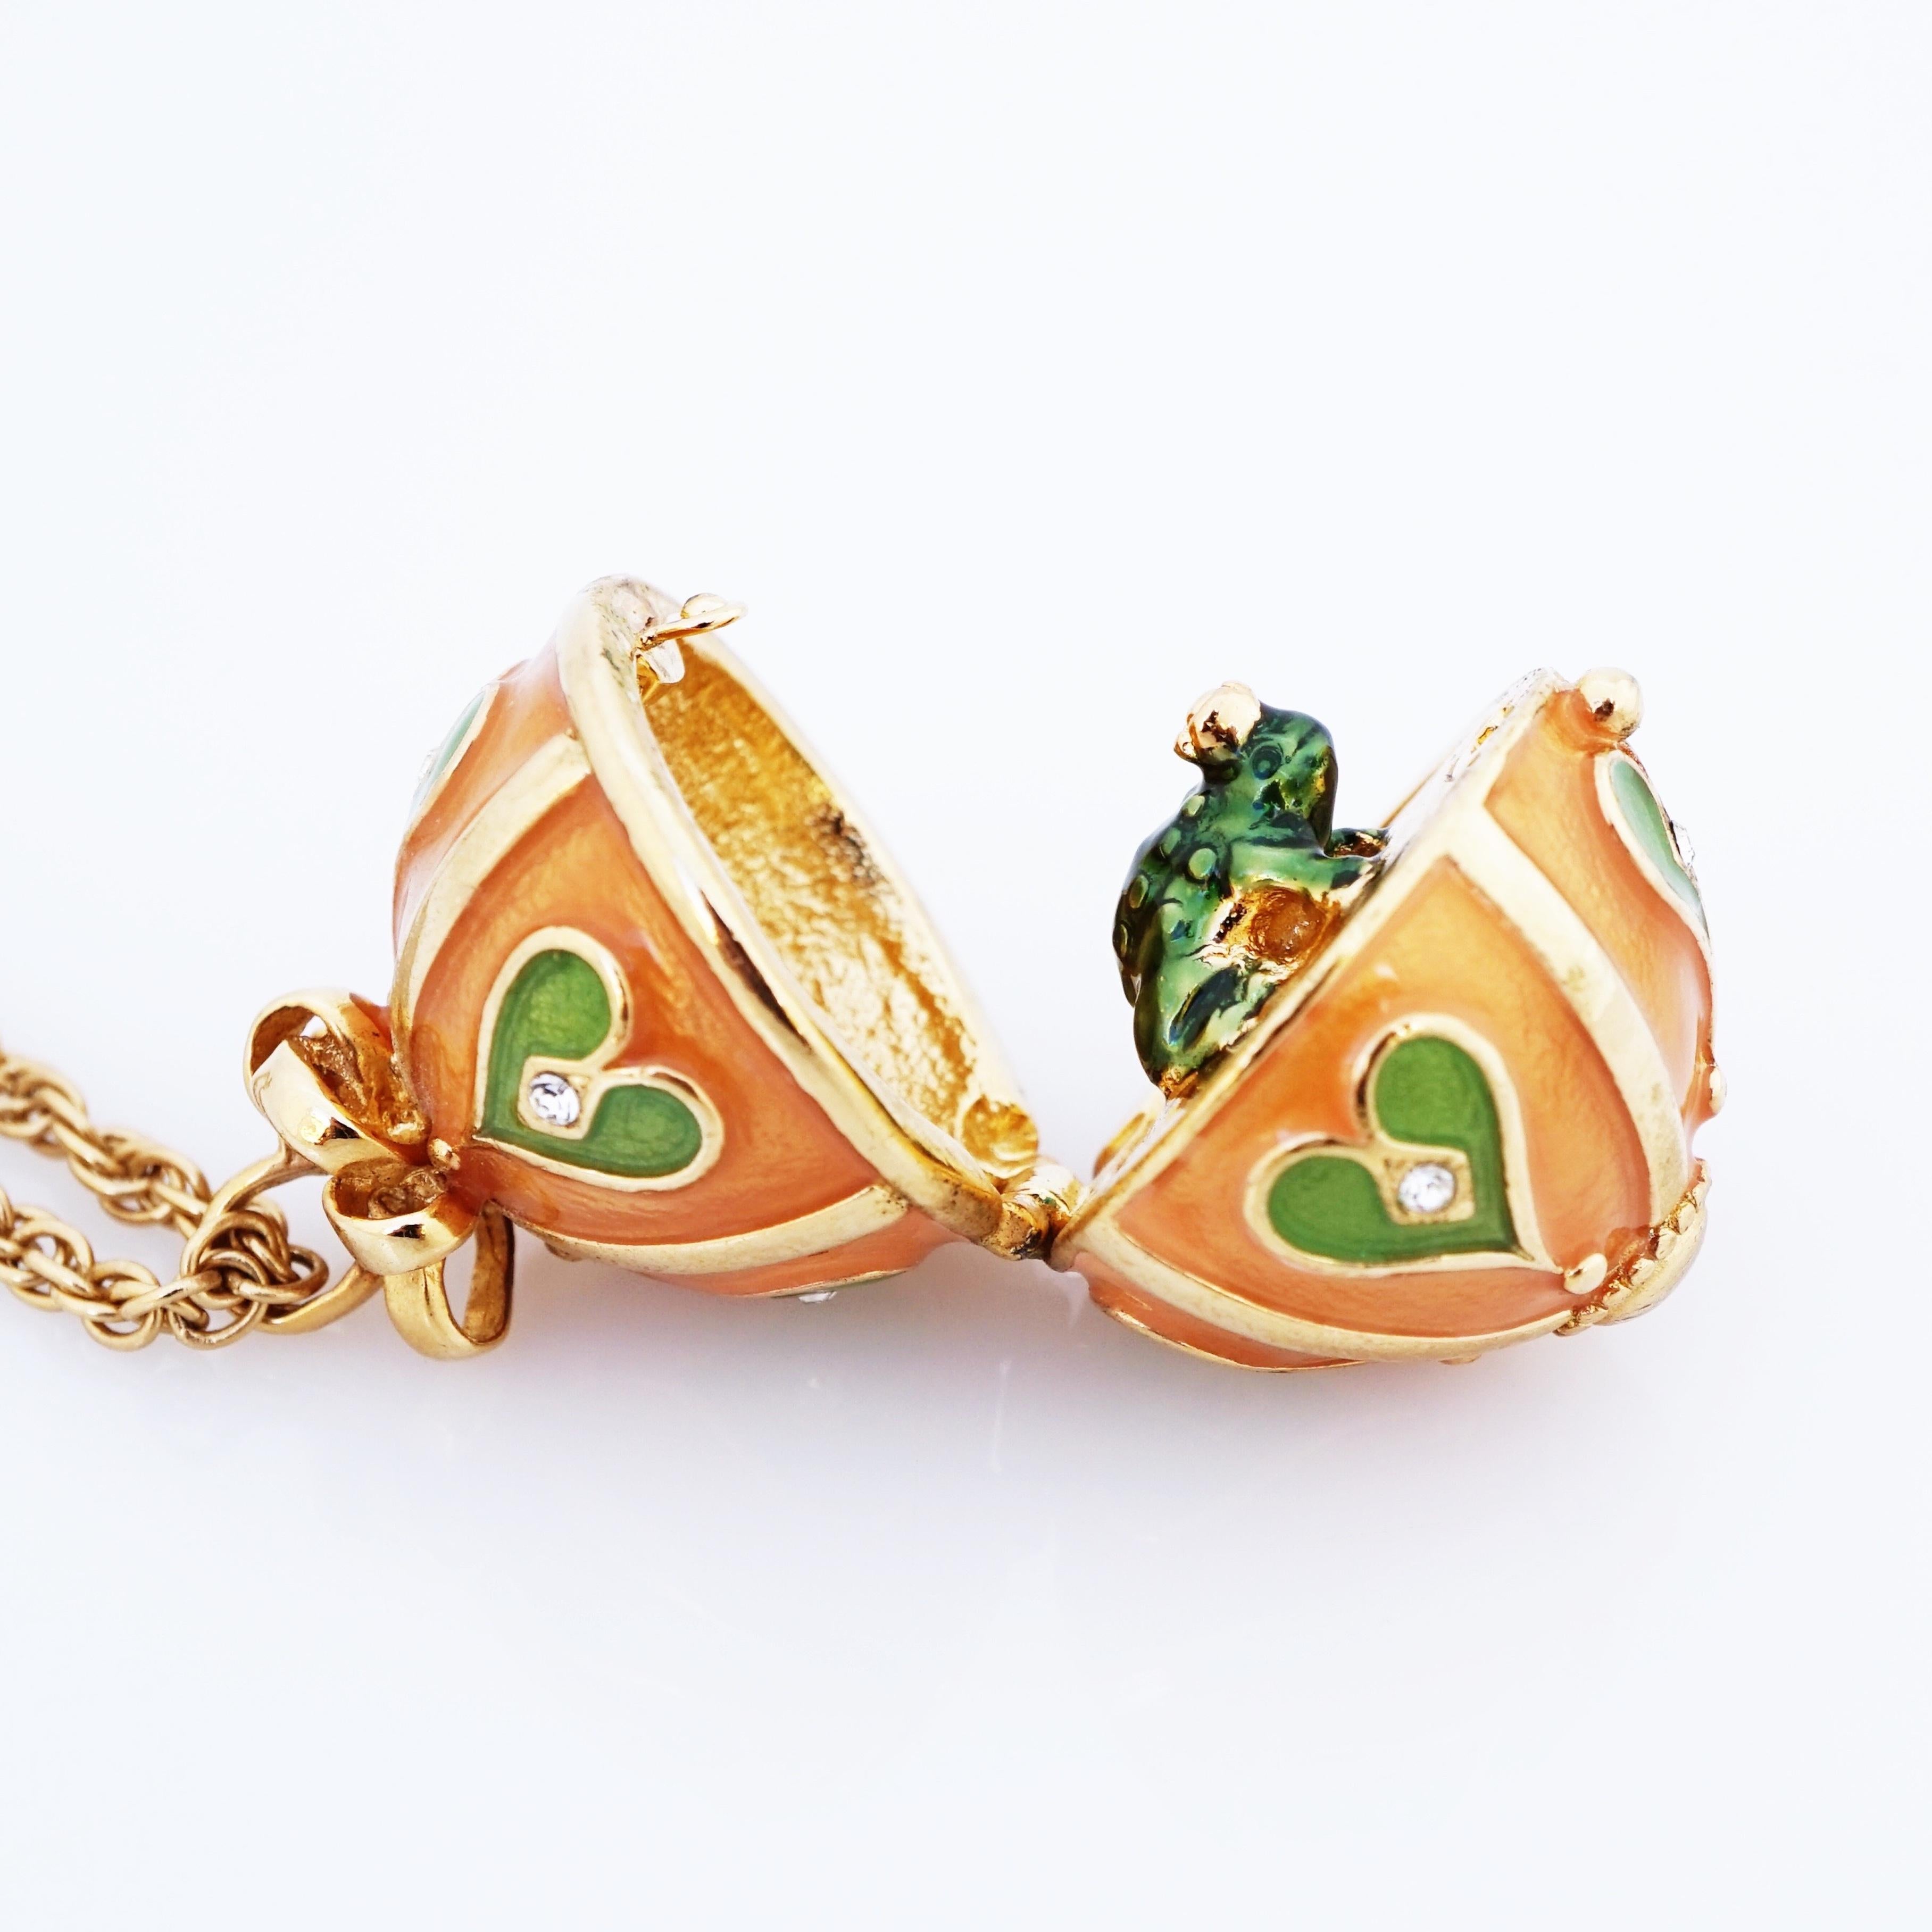 Modern Hinged Enamel Egg Pendant Necklace With Frog Prince Figure By Joan Rivers, 1990s